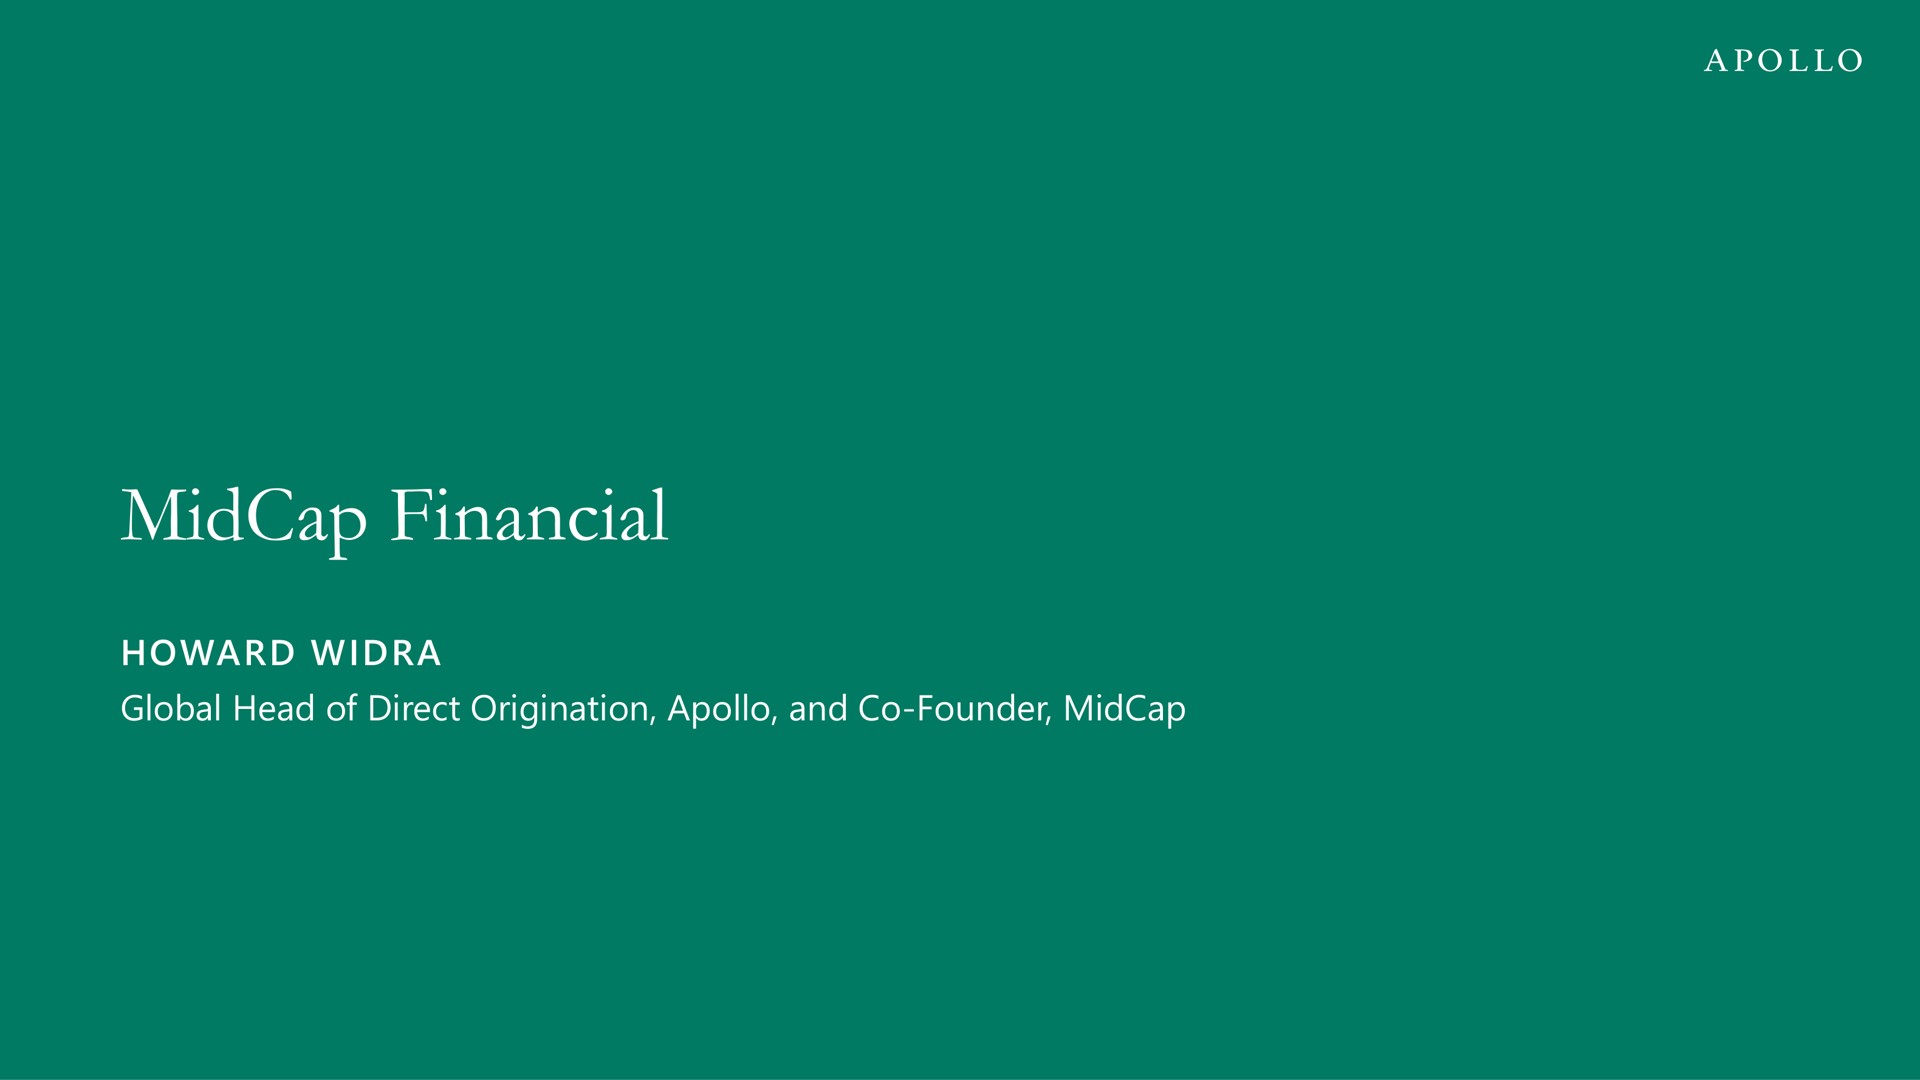 financial | Apollo Global Management